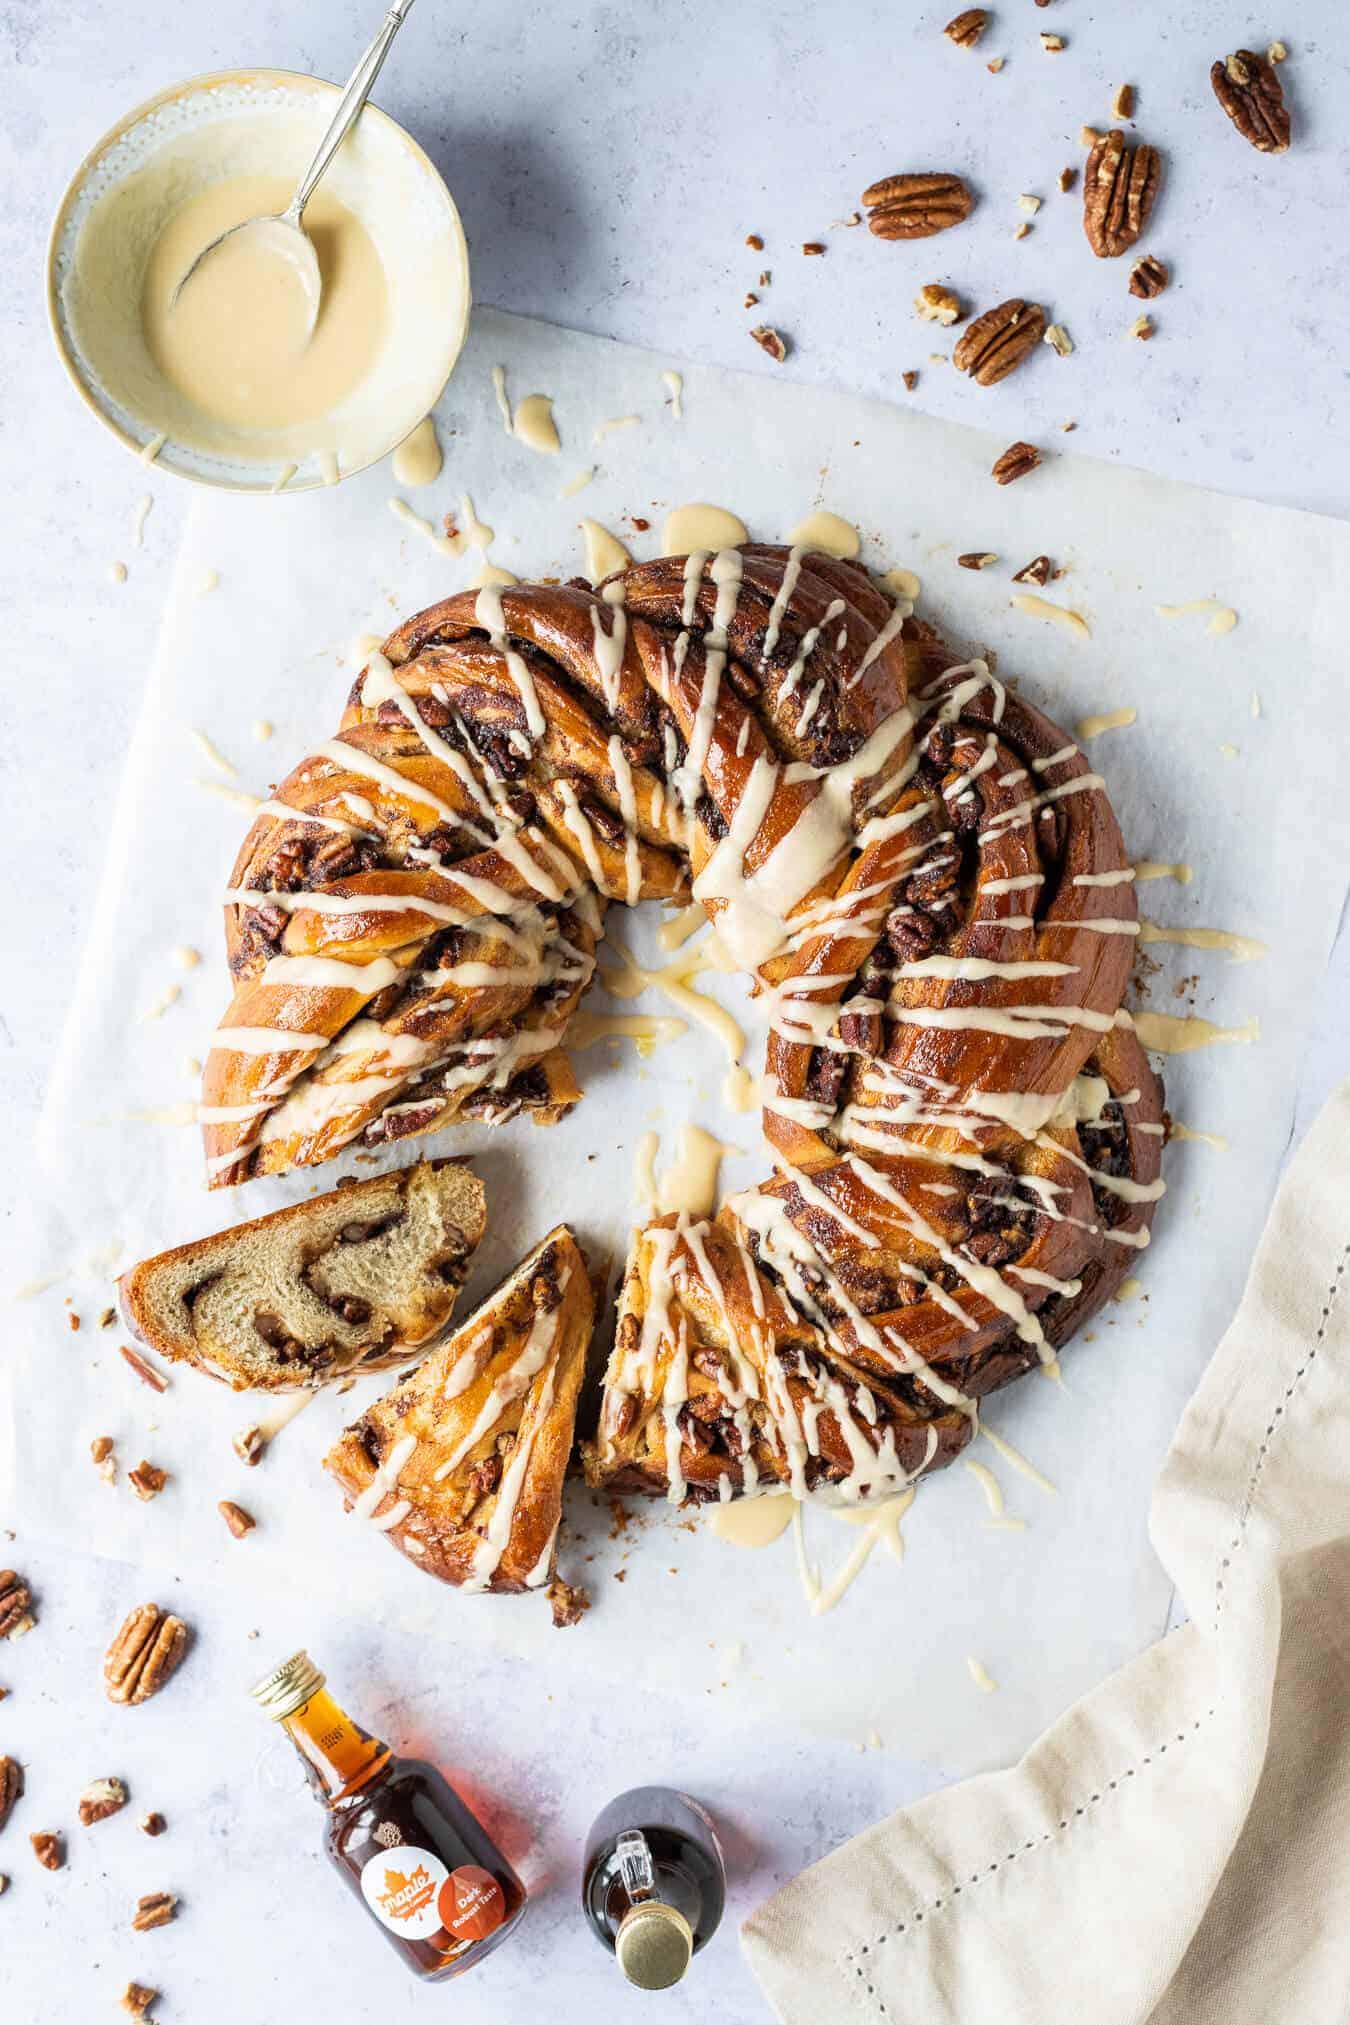 Maple pecan bread wreath with two slices cut out on a sheet of baking parchment with a bowl of glaze, pecan nuts and mini bottles of maple syrup.